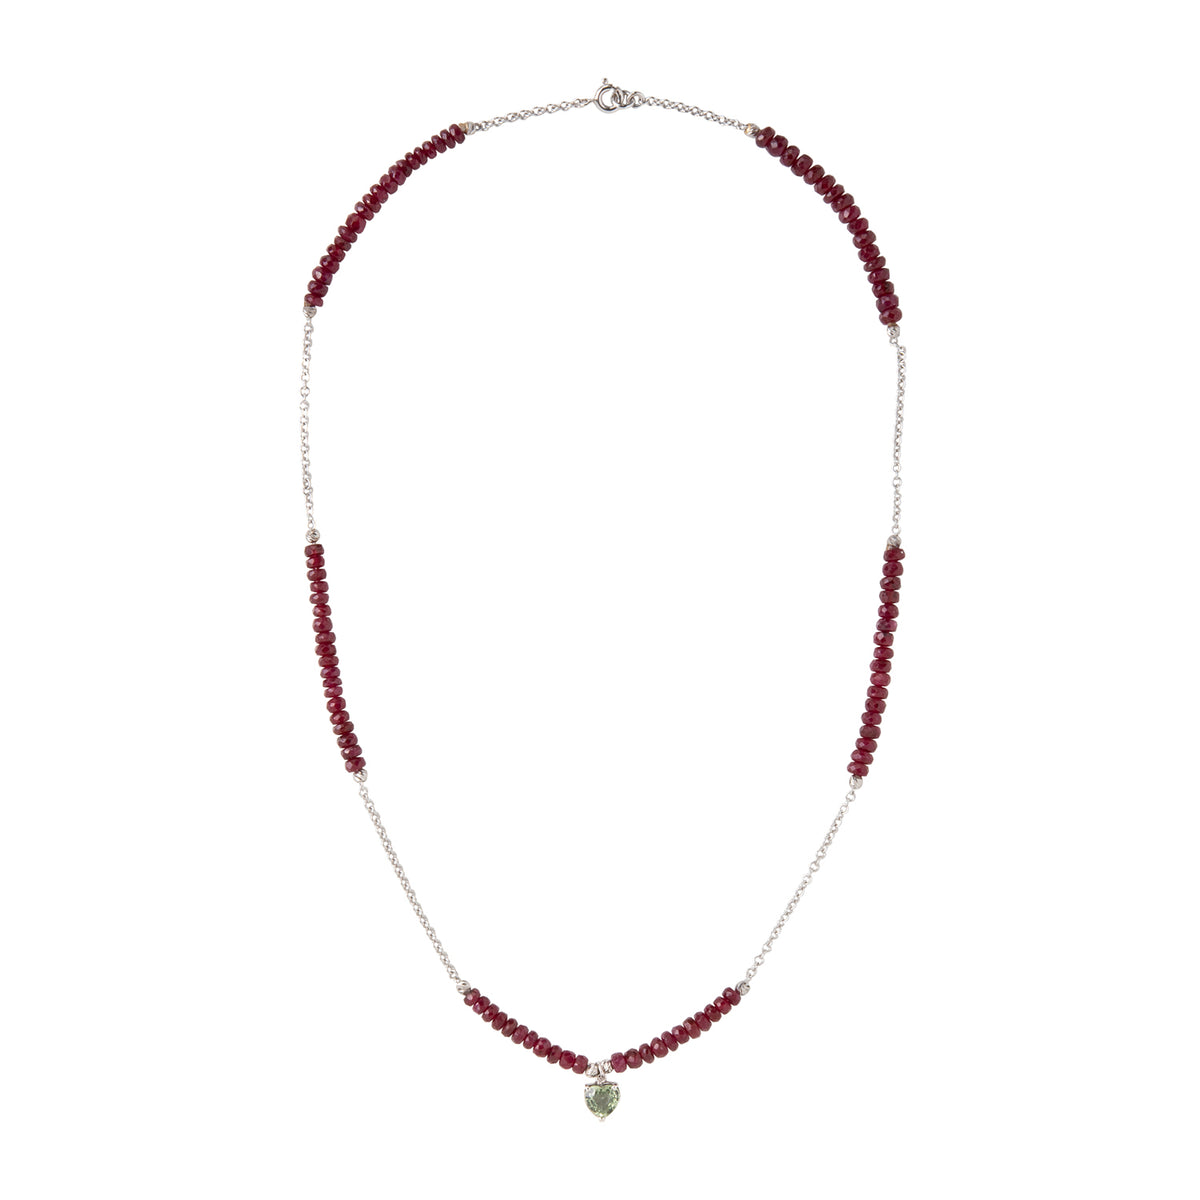 Green Sapphire and Ruby beads necklace 